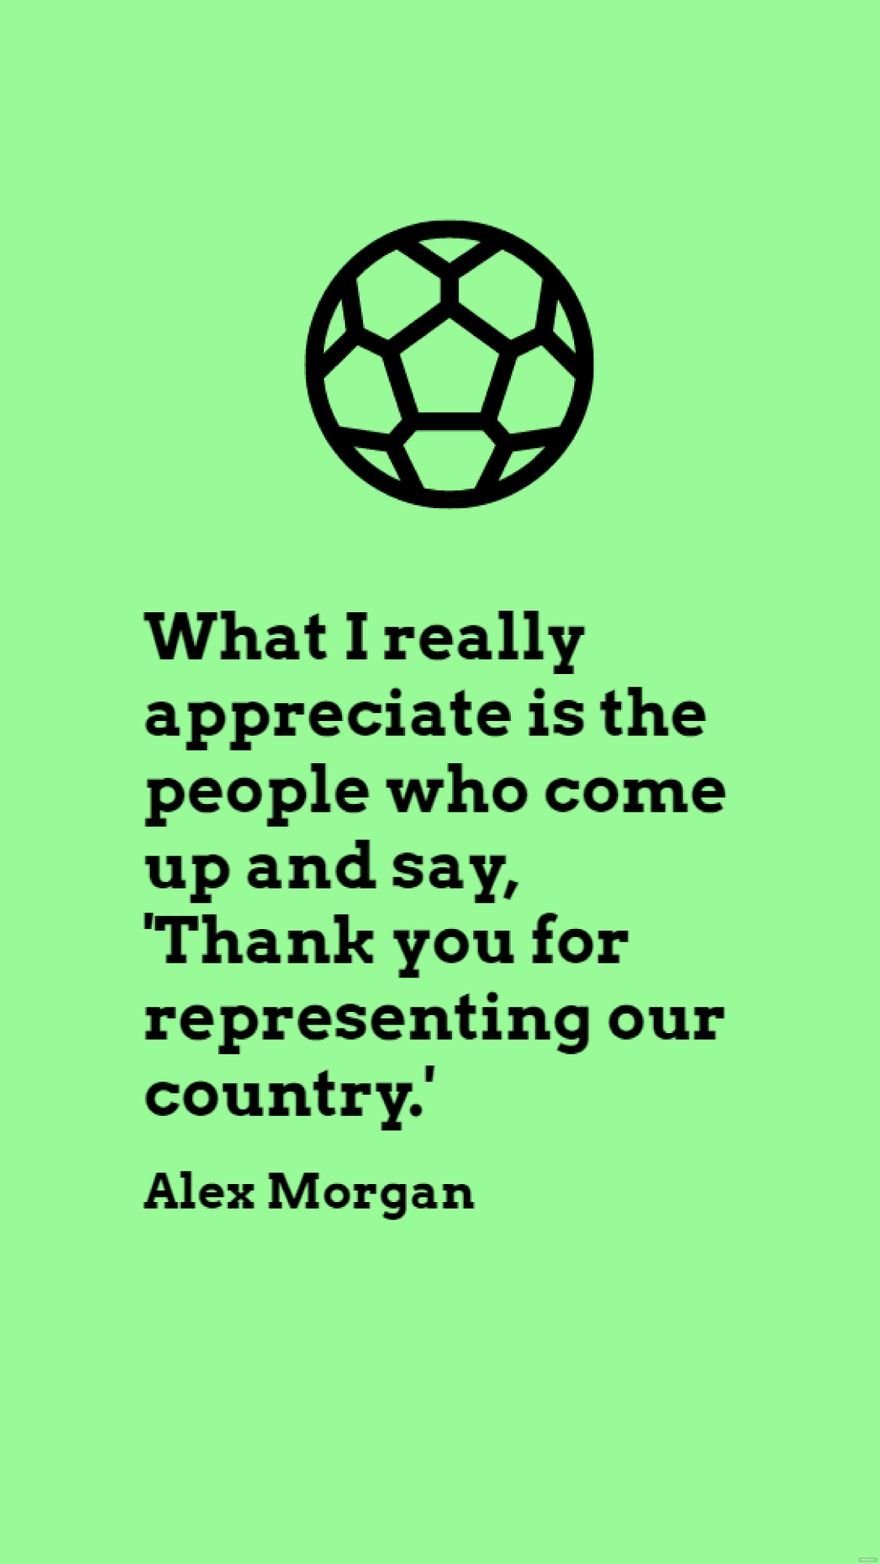 Alex Morgan - What I really appreciate is the people who come up and say, 'Thank you for representing our country.'